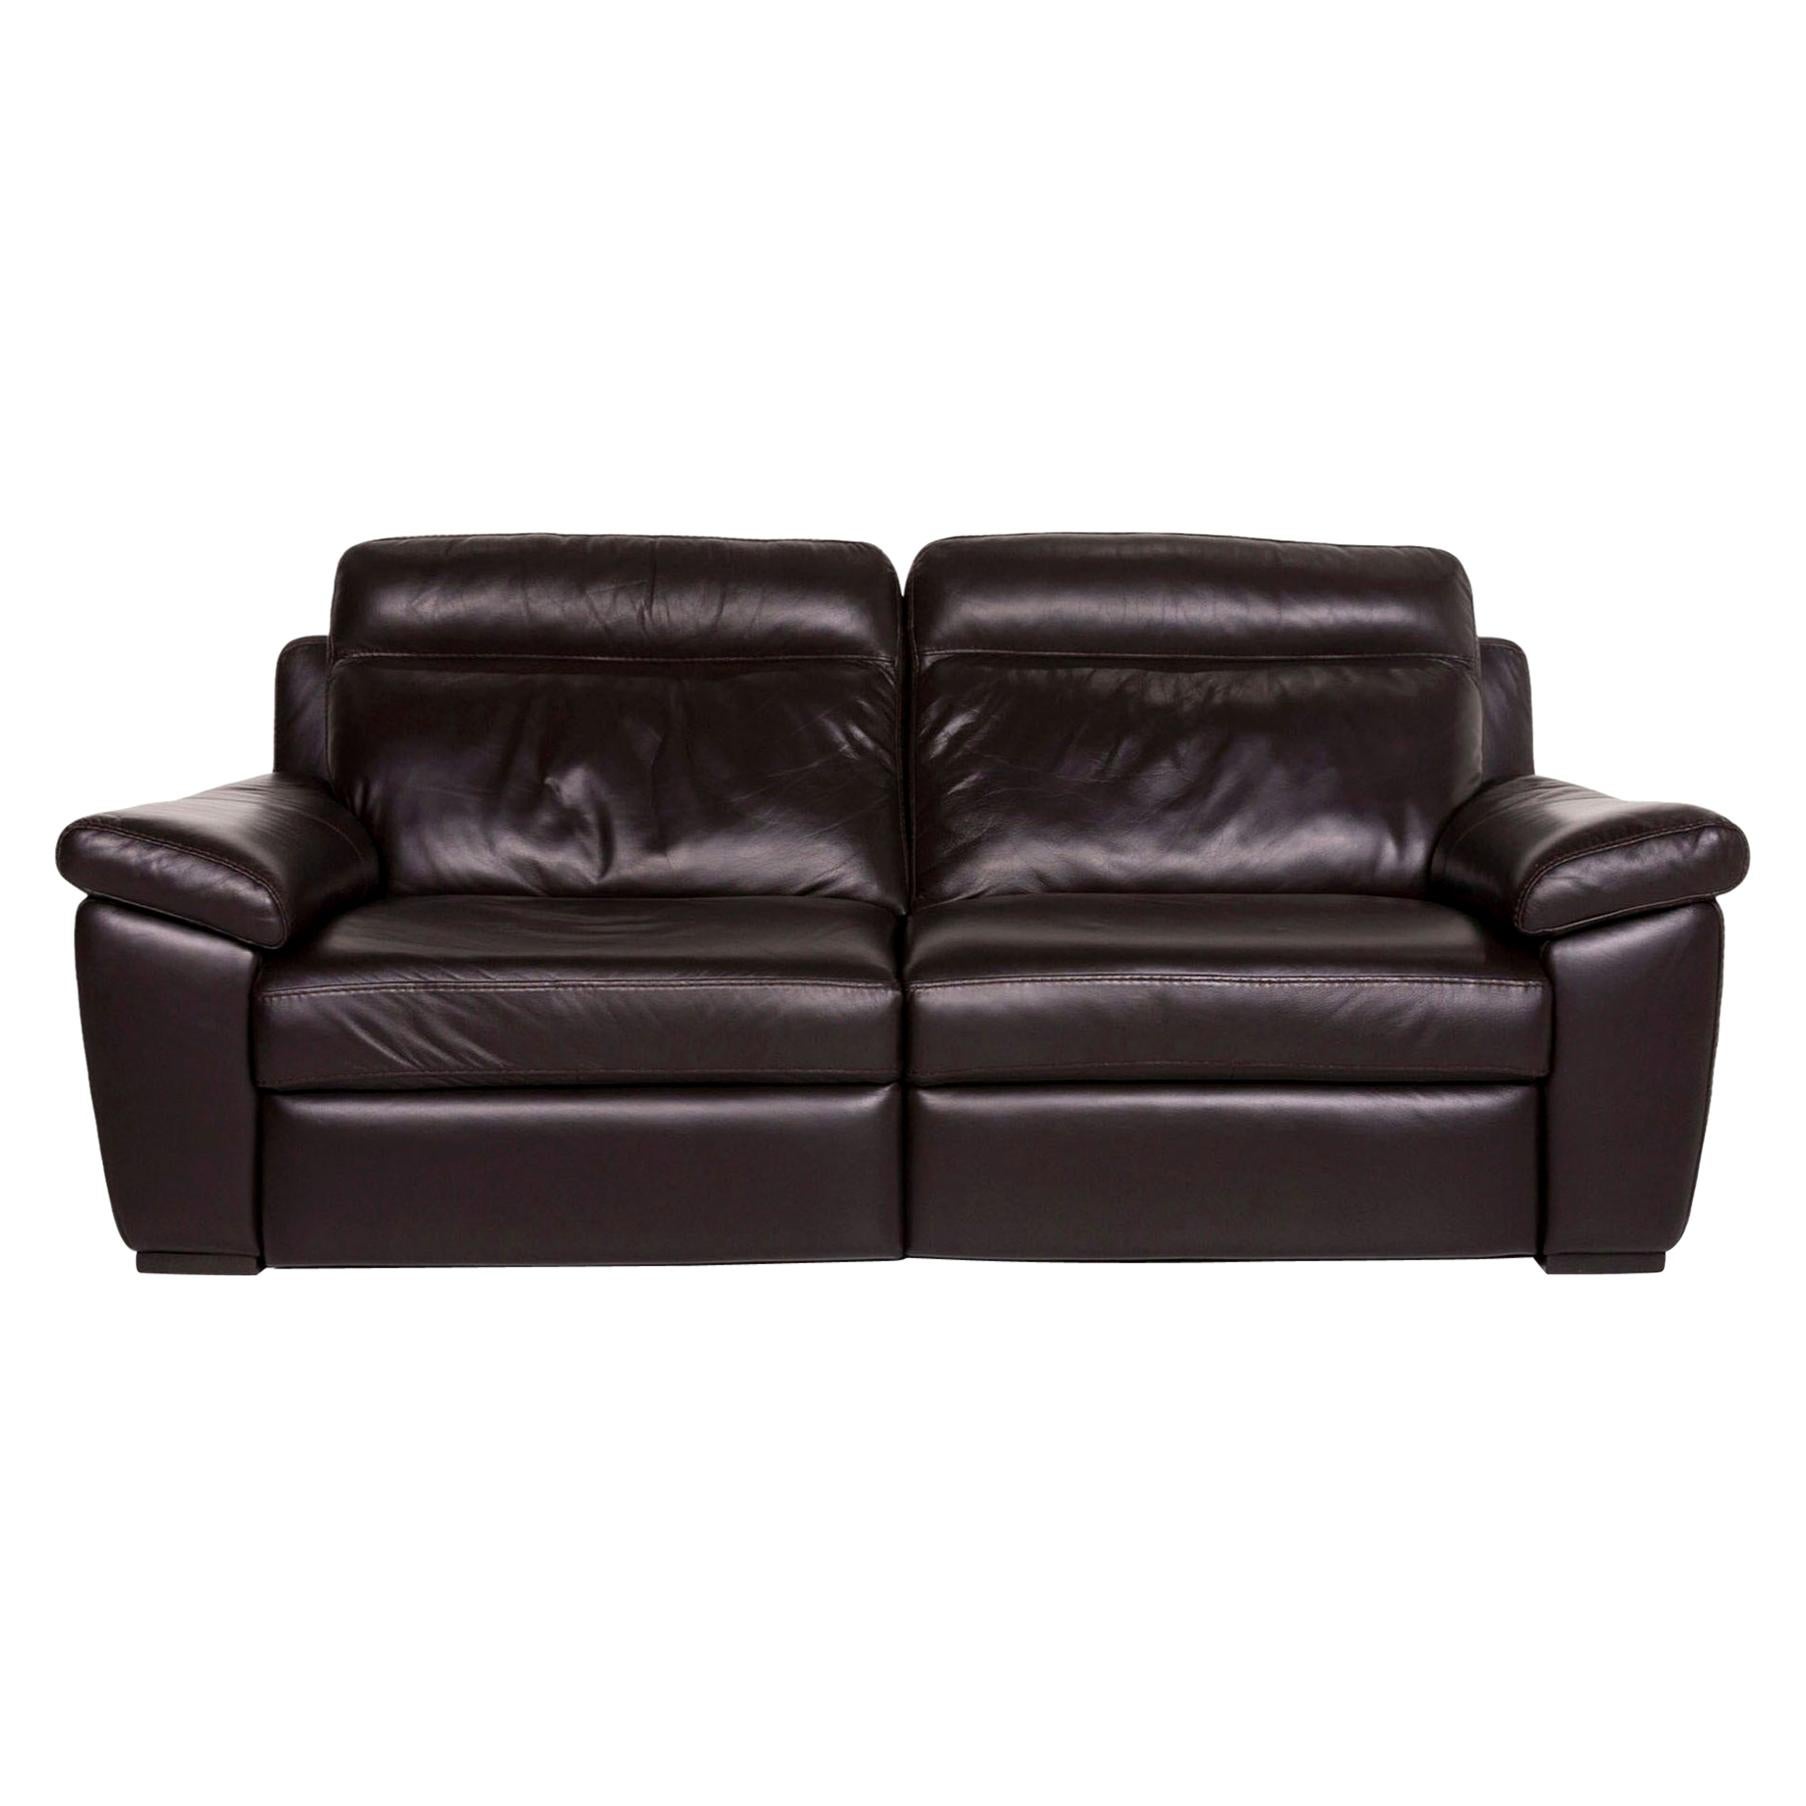 Natuzzi Leather Sofa Brown Dark Brown Three-Seat Function Relax Function Couch